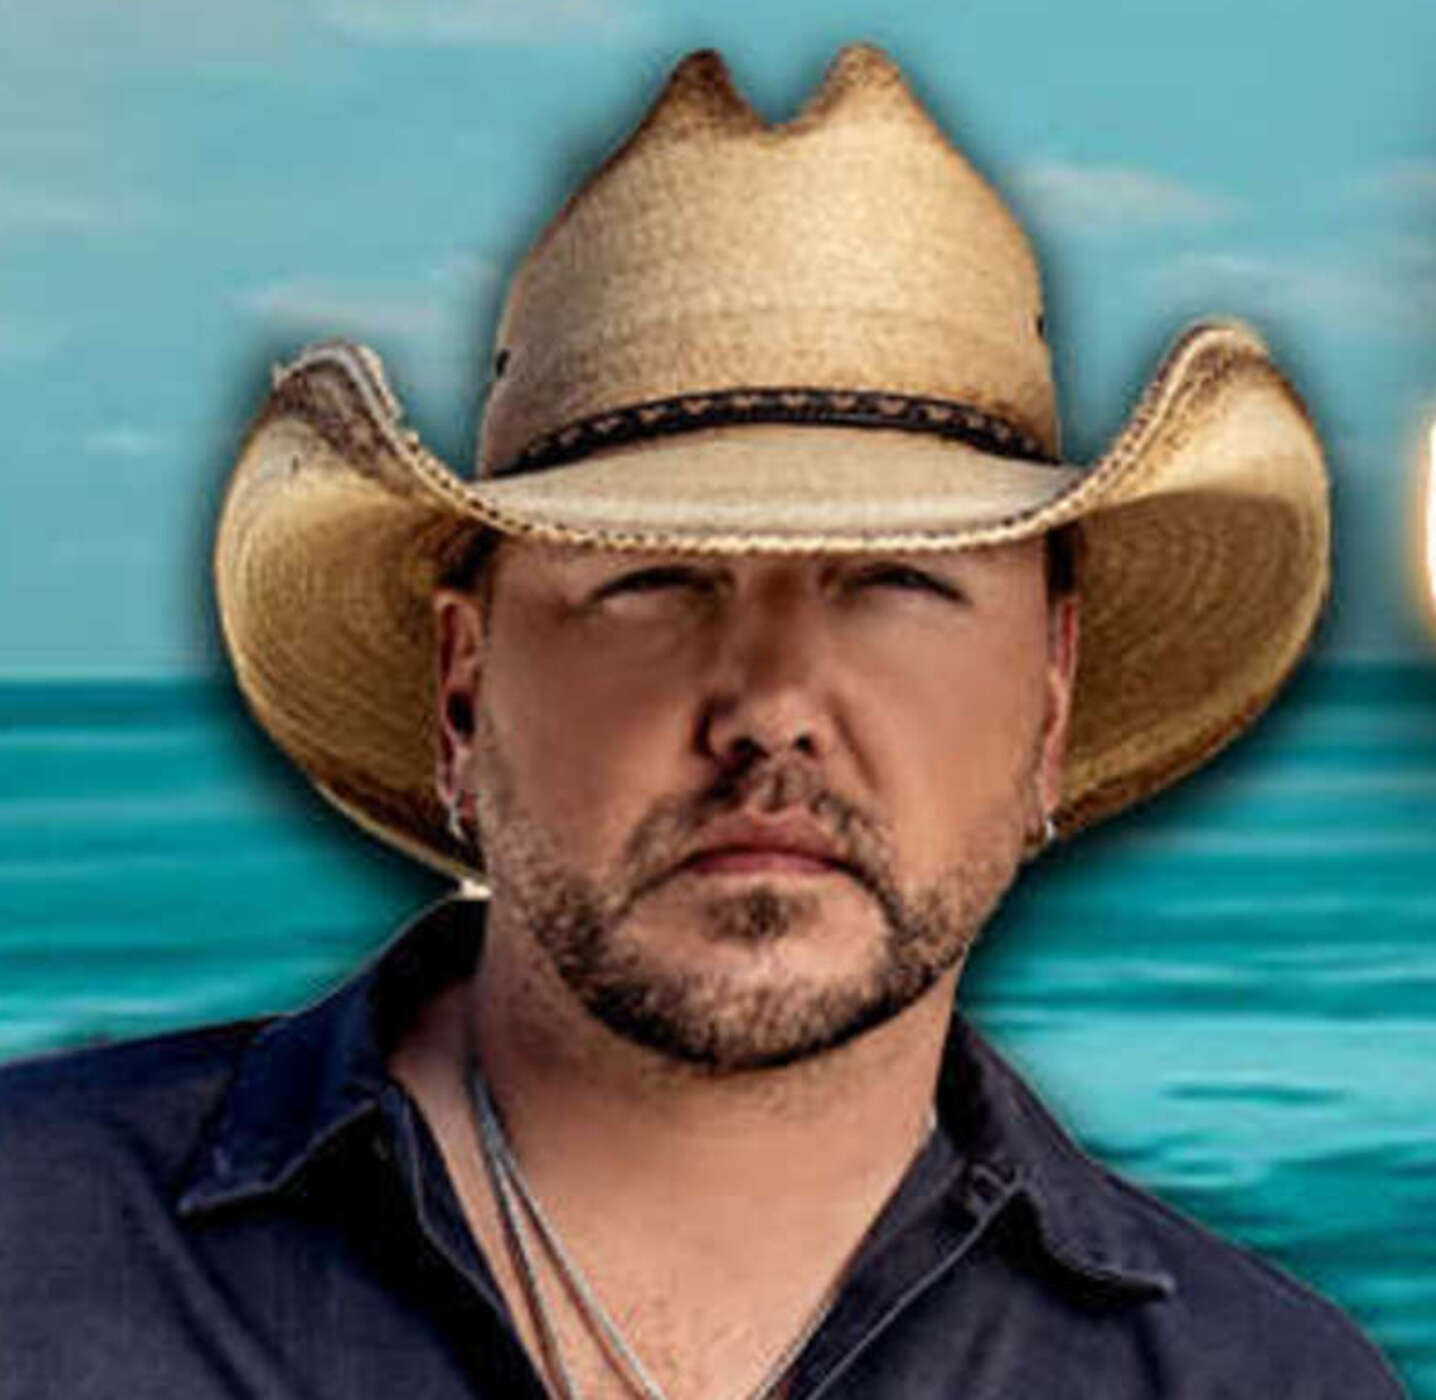 Melissa is flying to see Jason Aldean in the Bahamas this weekend!